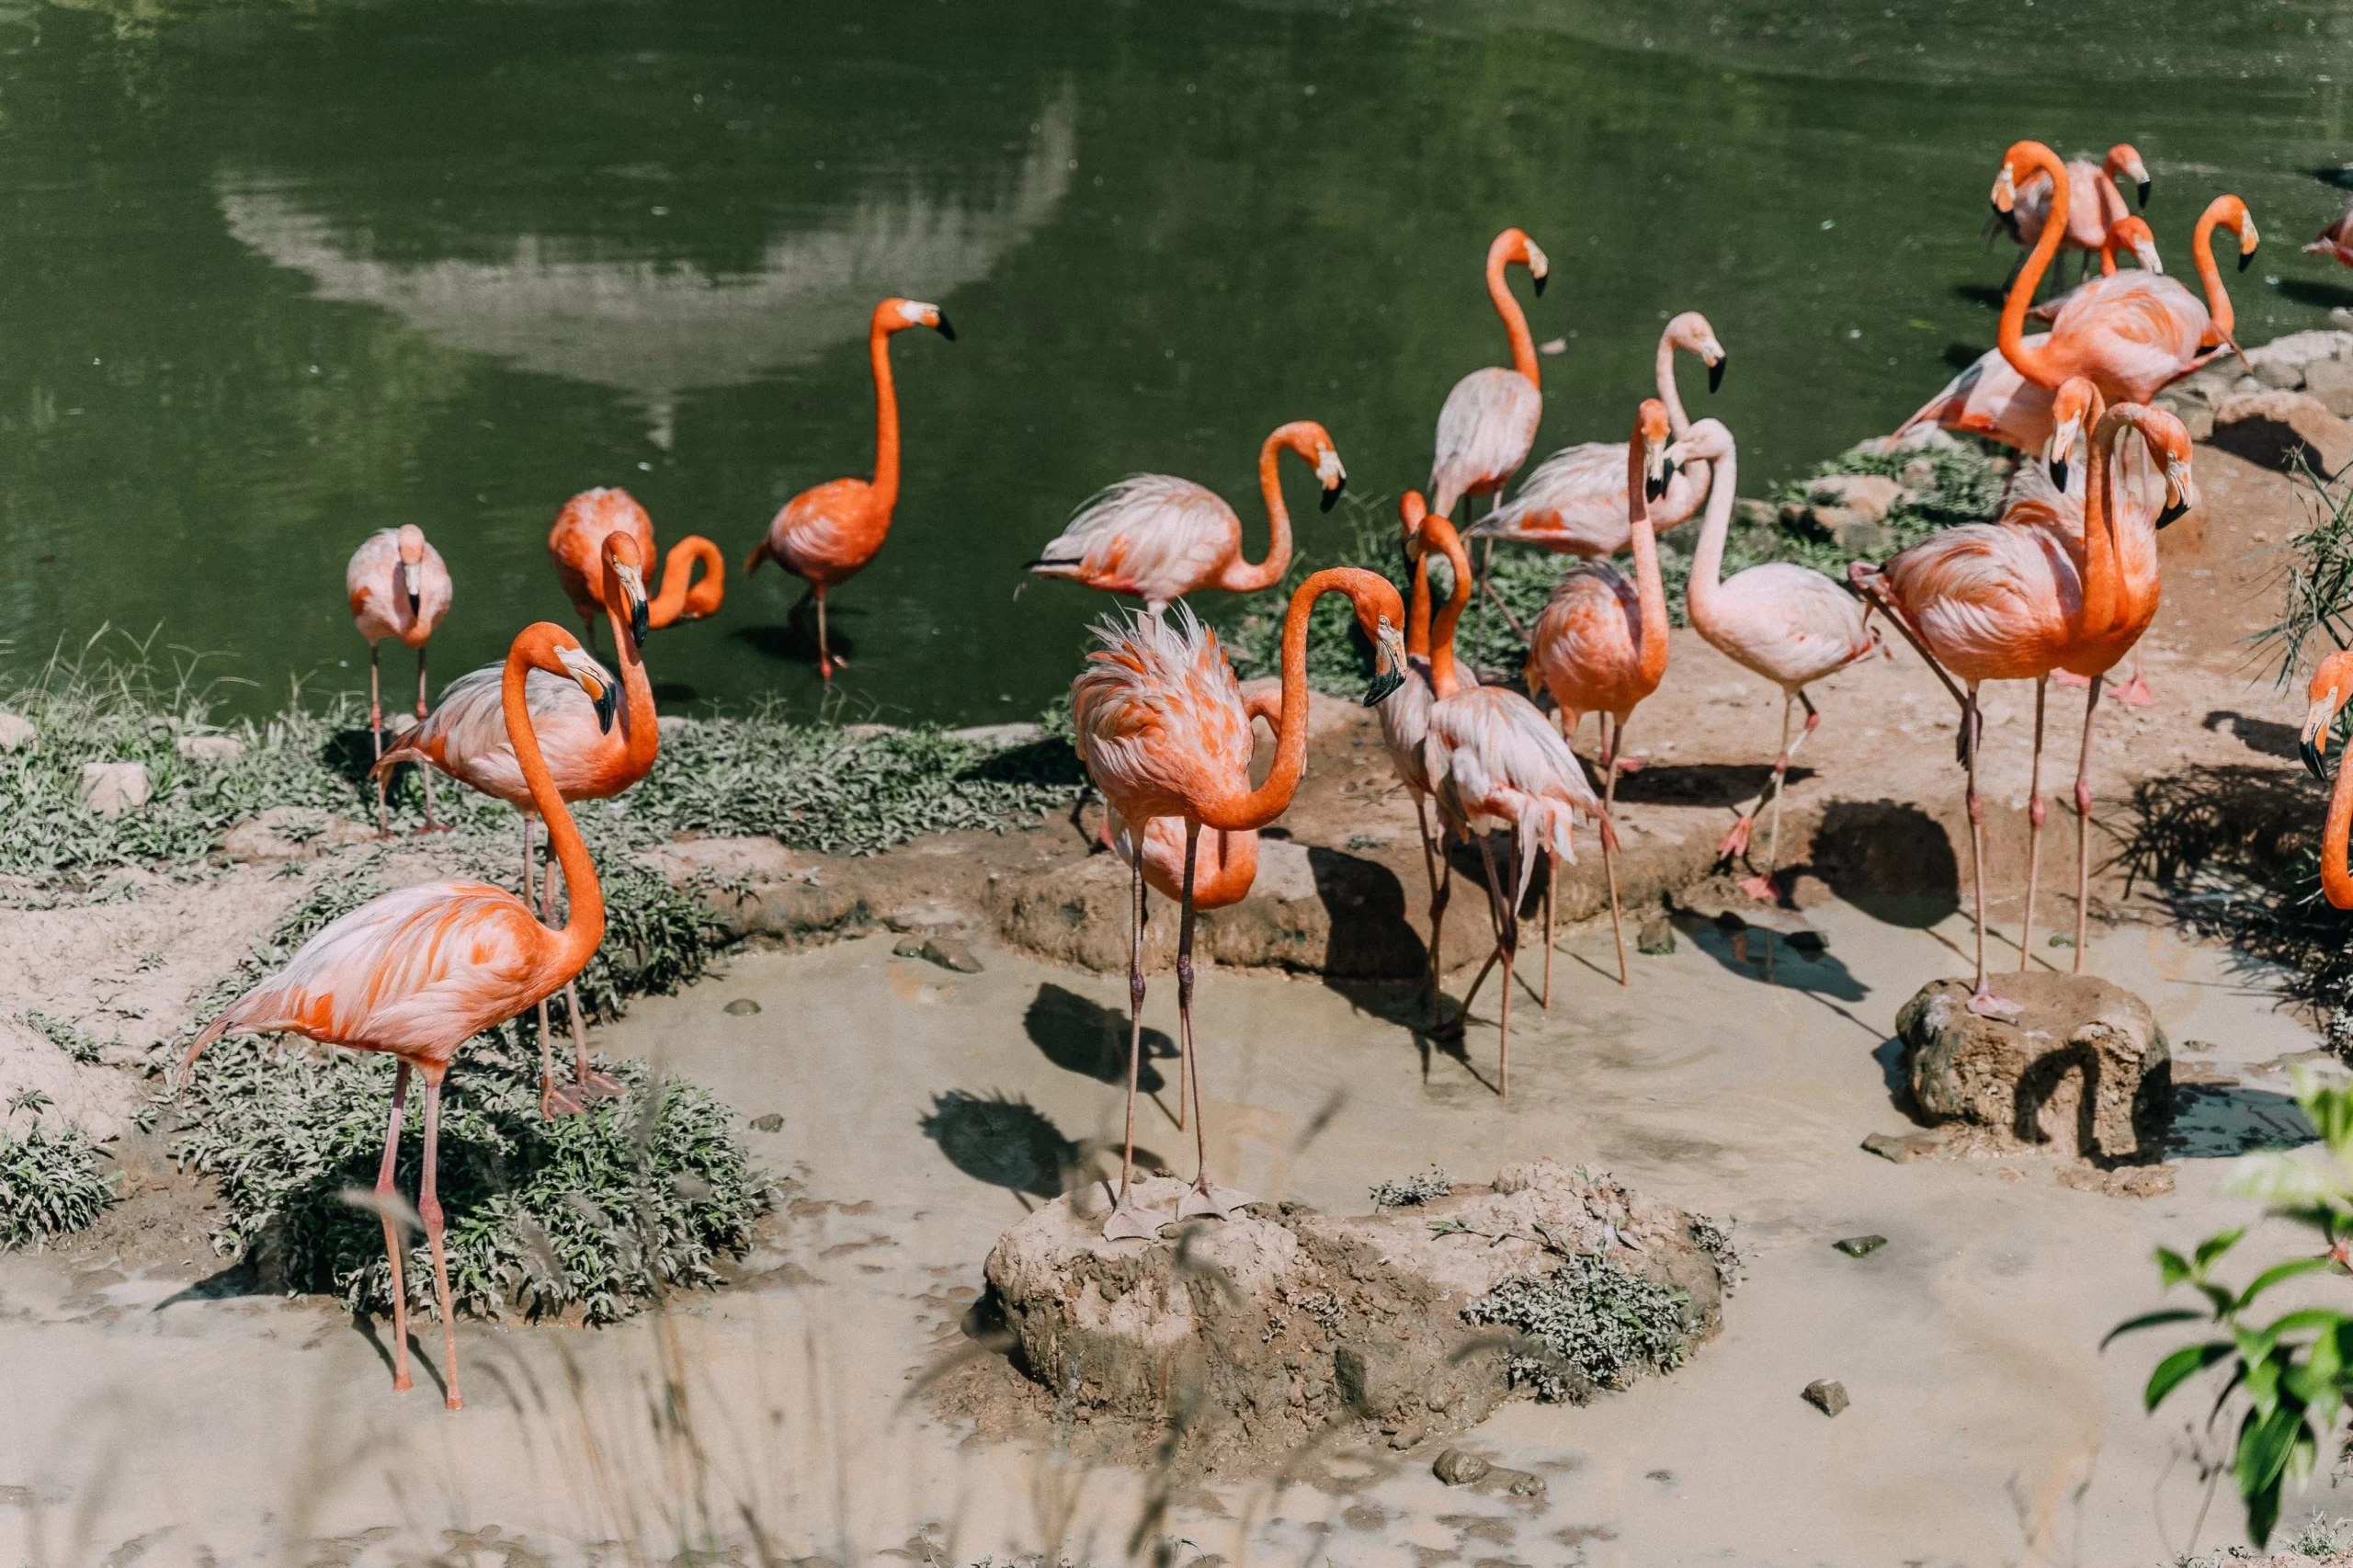 A group of Flamingos stand on a sandy beach.